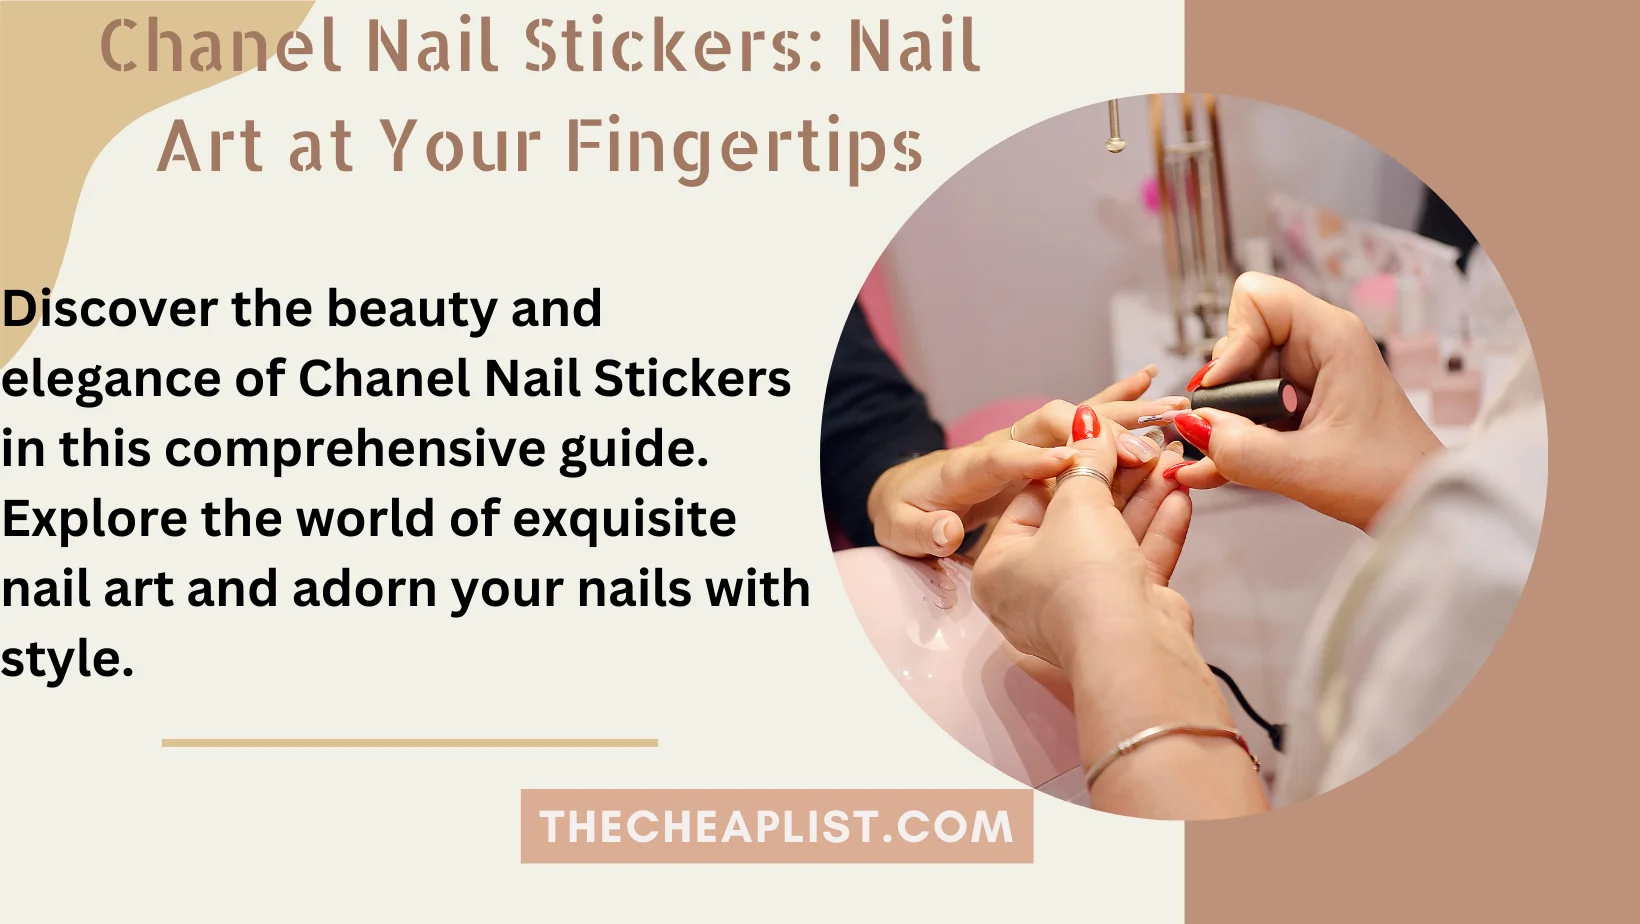 Chanel Nail Stickers: Nail Art at Your Fingertips - Thecheaplist